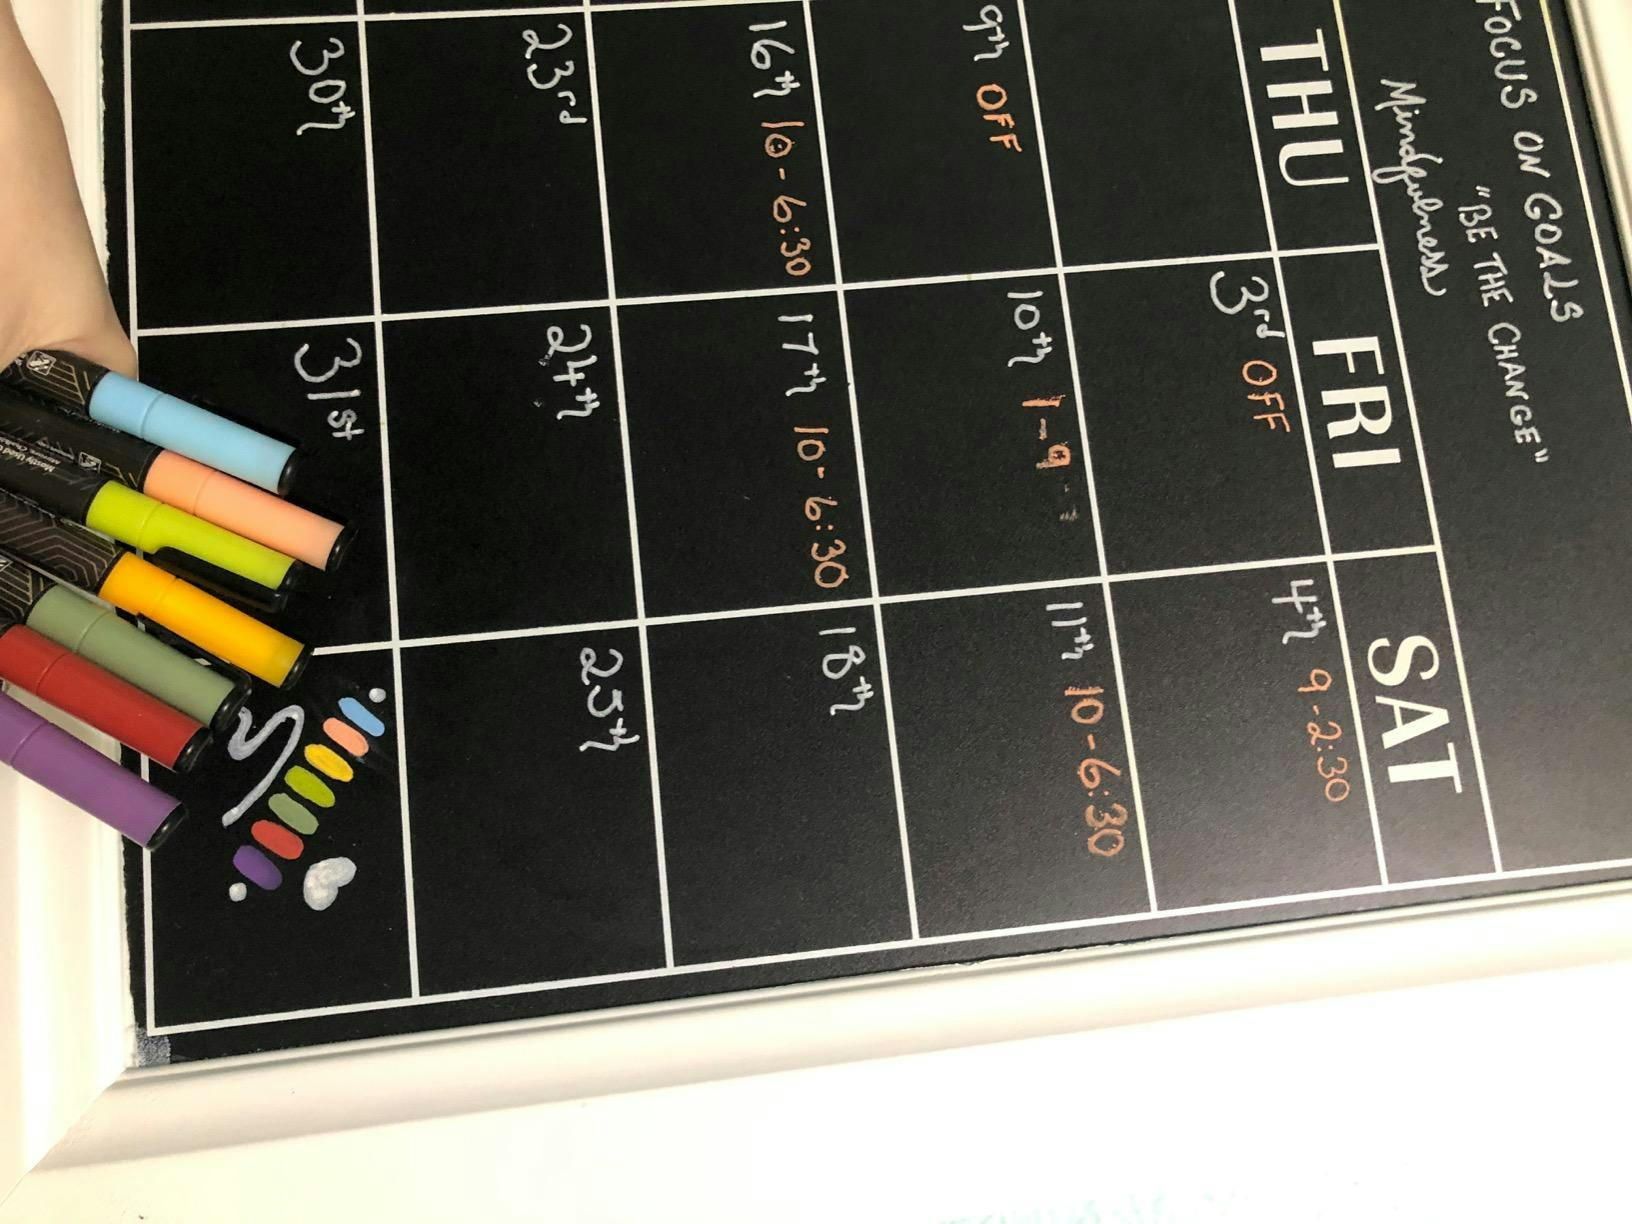 Chalkola Acrylic Marker Review (Bullet Journal Version) - Chocolate Musings